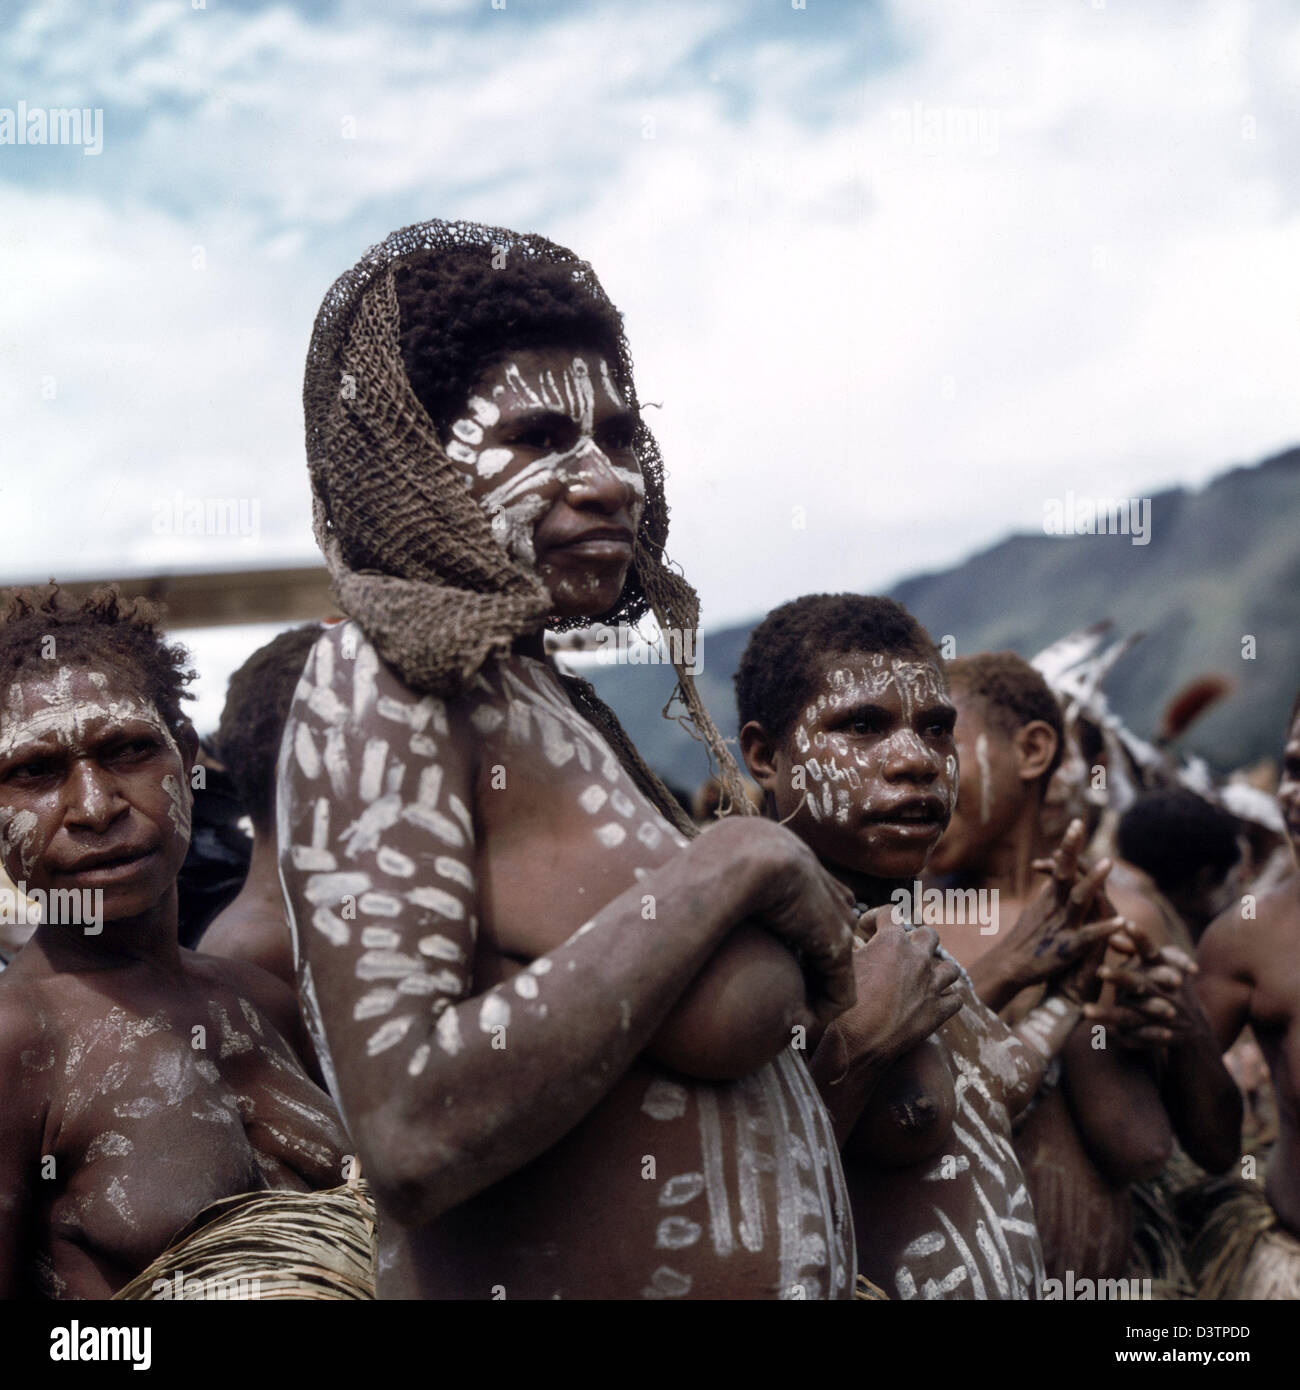 The undated picture shows a group of young Papua women with white